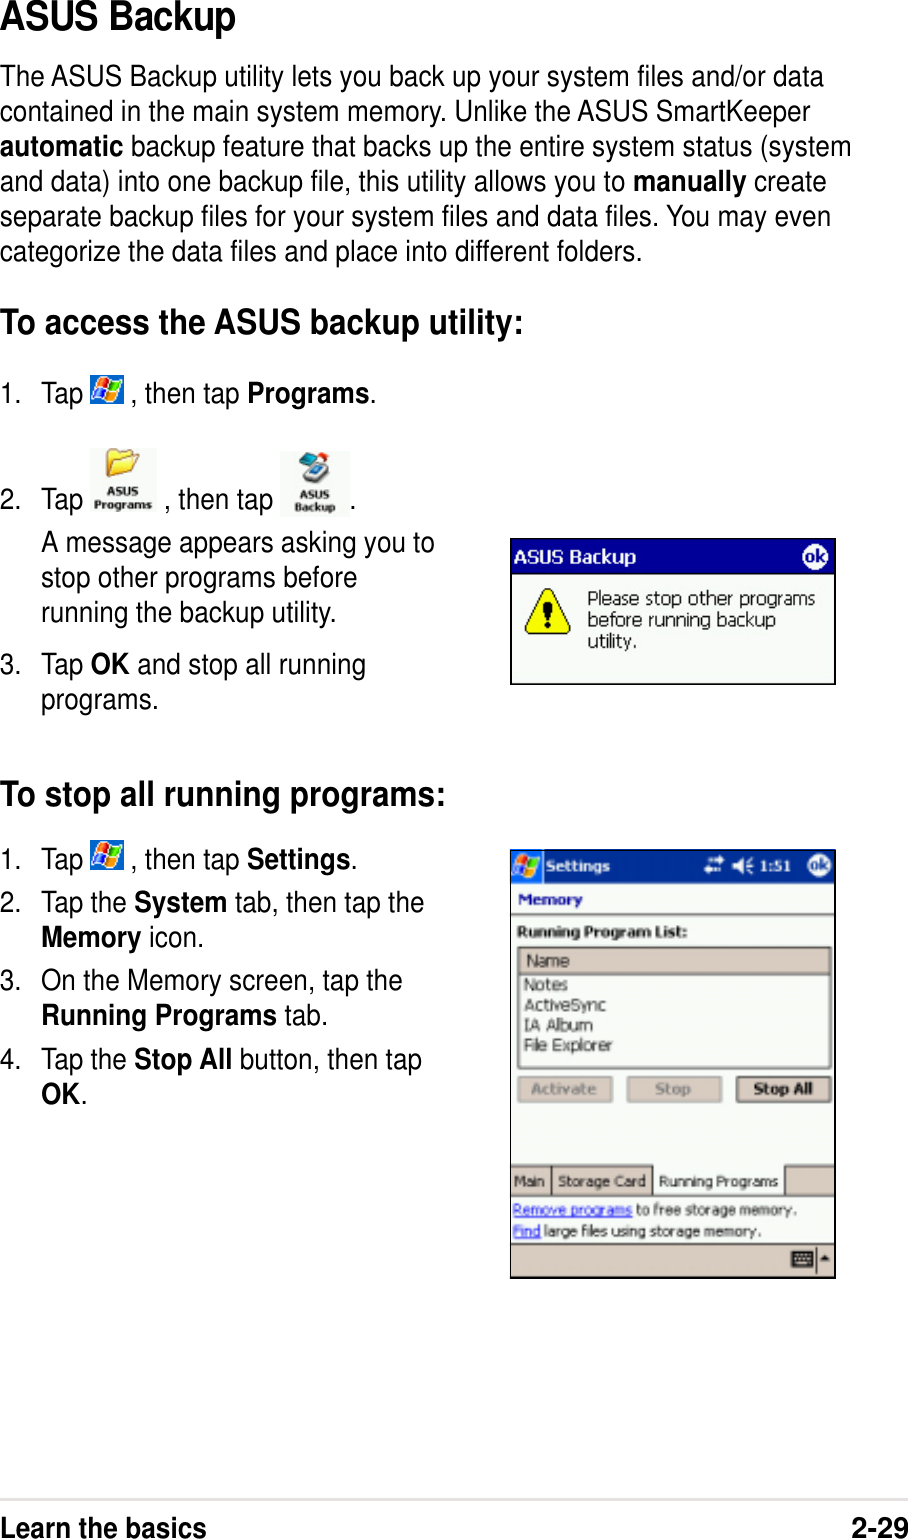 Learn the basics2-29ASUS BackupThe ASUS Backup utility lets you back up your system files and/or datacontained in the main system memory. Unlike the ASUS SmartKeeperautomatic backup feature that backs up the entire system status (systemand data) into one backup file, this utility allows you to manually createseparate backup files for your system files and data files. You may evencategorize the data files and place into different folders.To access the ASUS backup utility:1. Tap   , then tap Programs.1. Tap   , then tap Settings.2. Tap the System tab, then tap theMemory icon.3. On the Memory screen, tap theRunning Programs tab.4. Tap the Stop All button, then tapOK.2. Tap   , then tap  .A message appears asking you tostop other programs beforerunning the backup utility.3. Tap OK and stop all runningprograms.To stop all running programs: